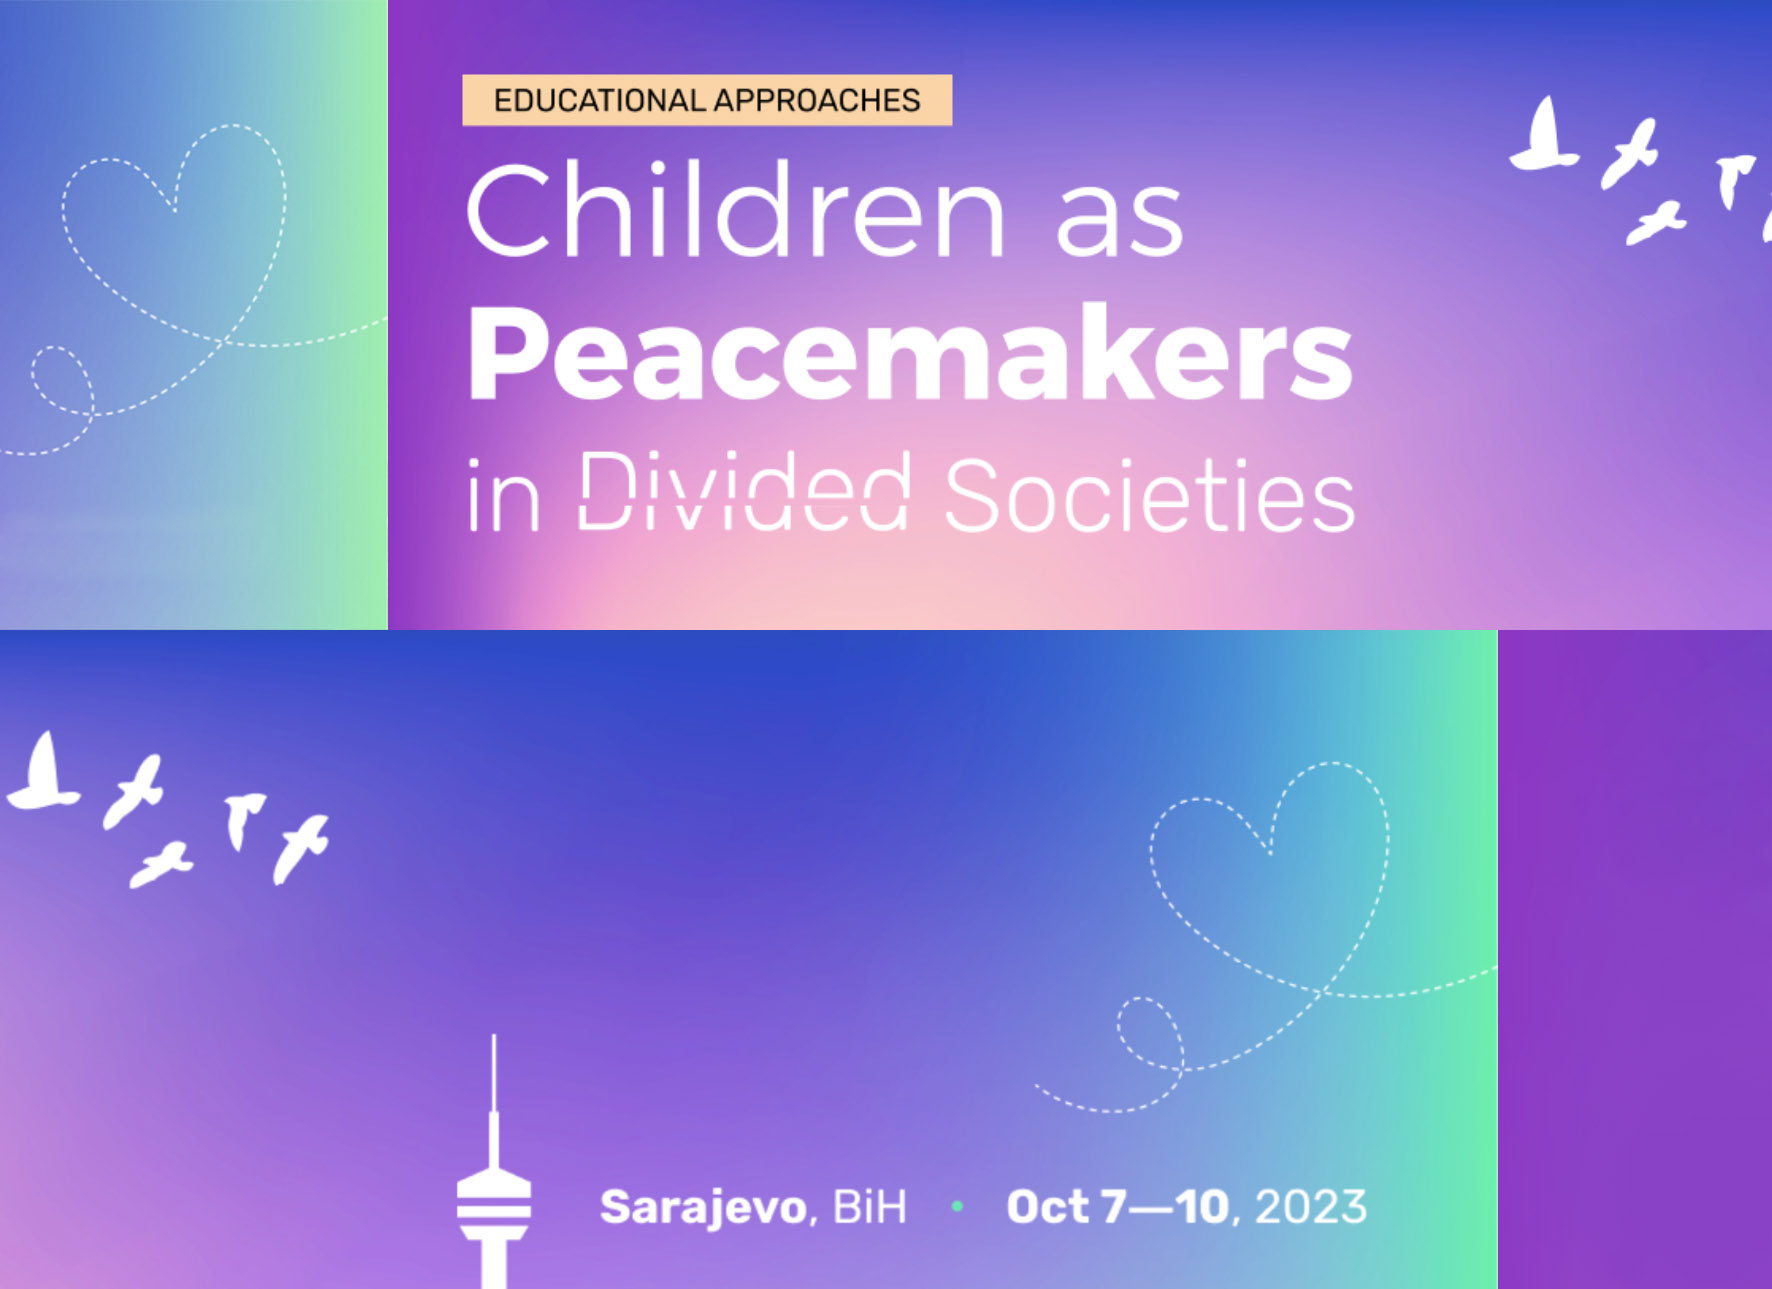 Međunarodna konferencija “Children as Peacemakers in Divided Societies: Educational Approaches”